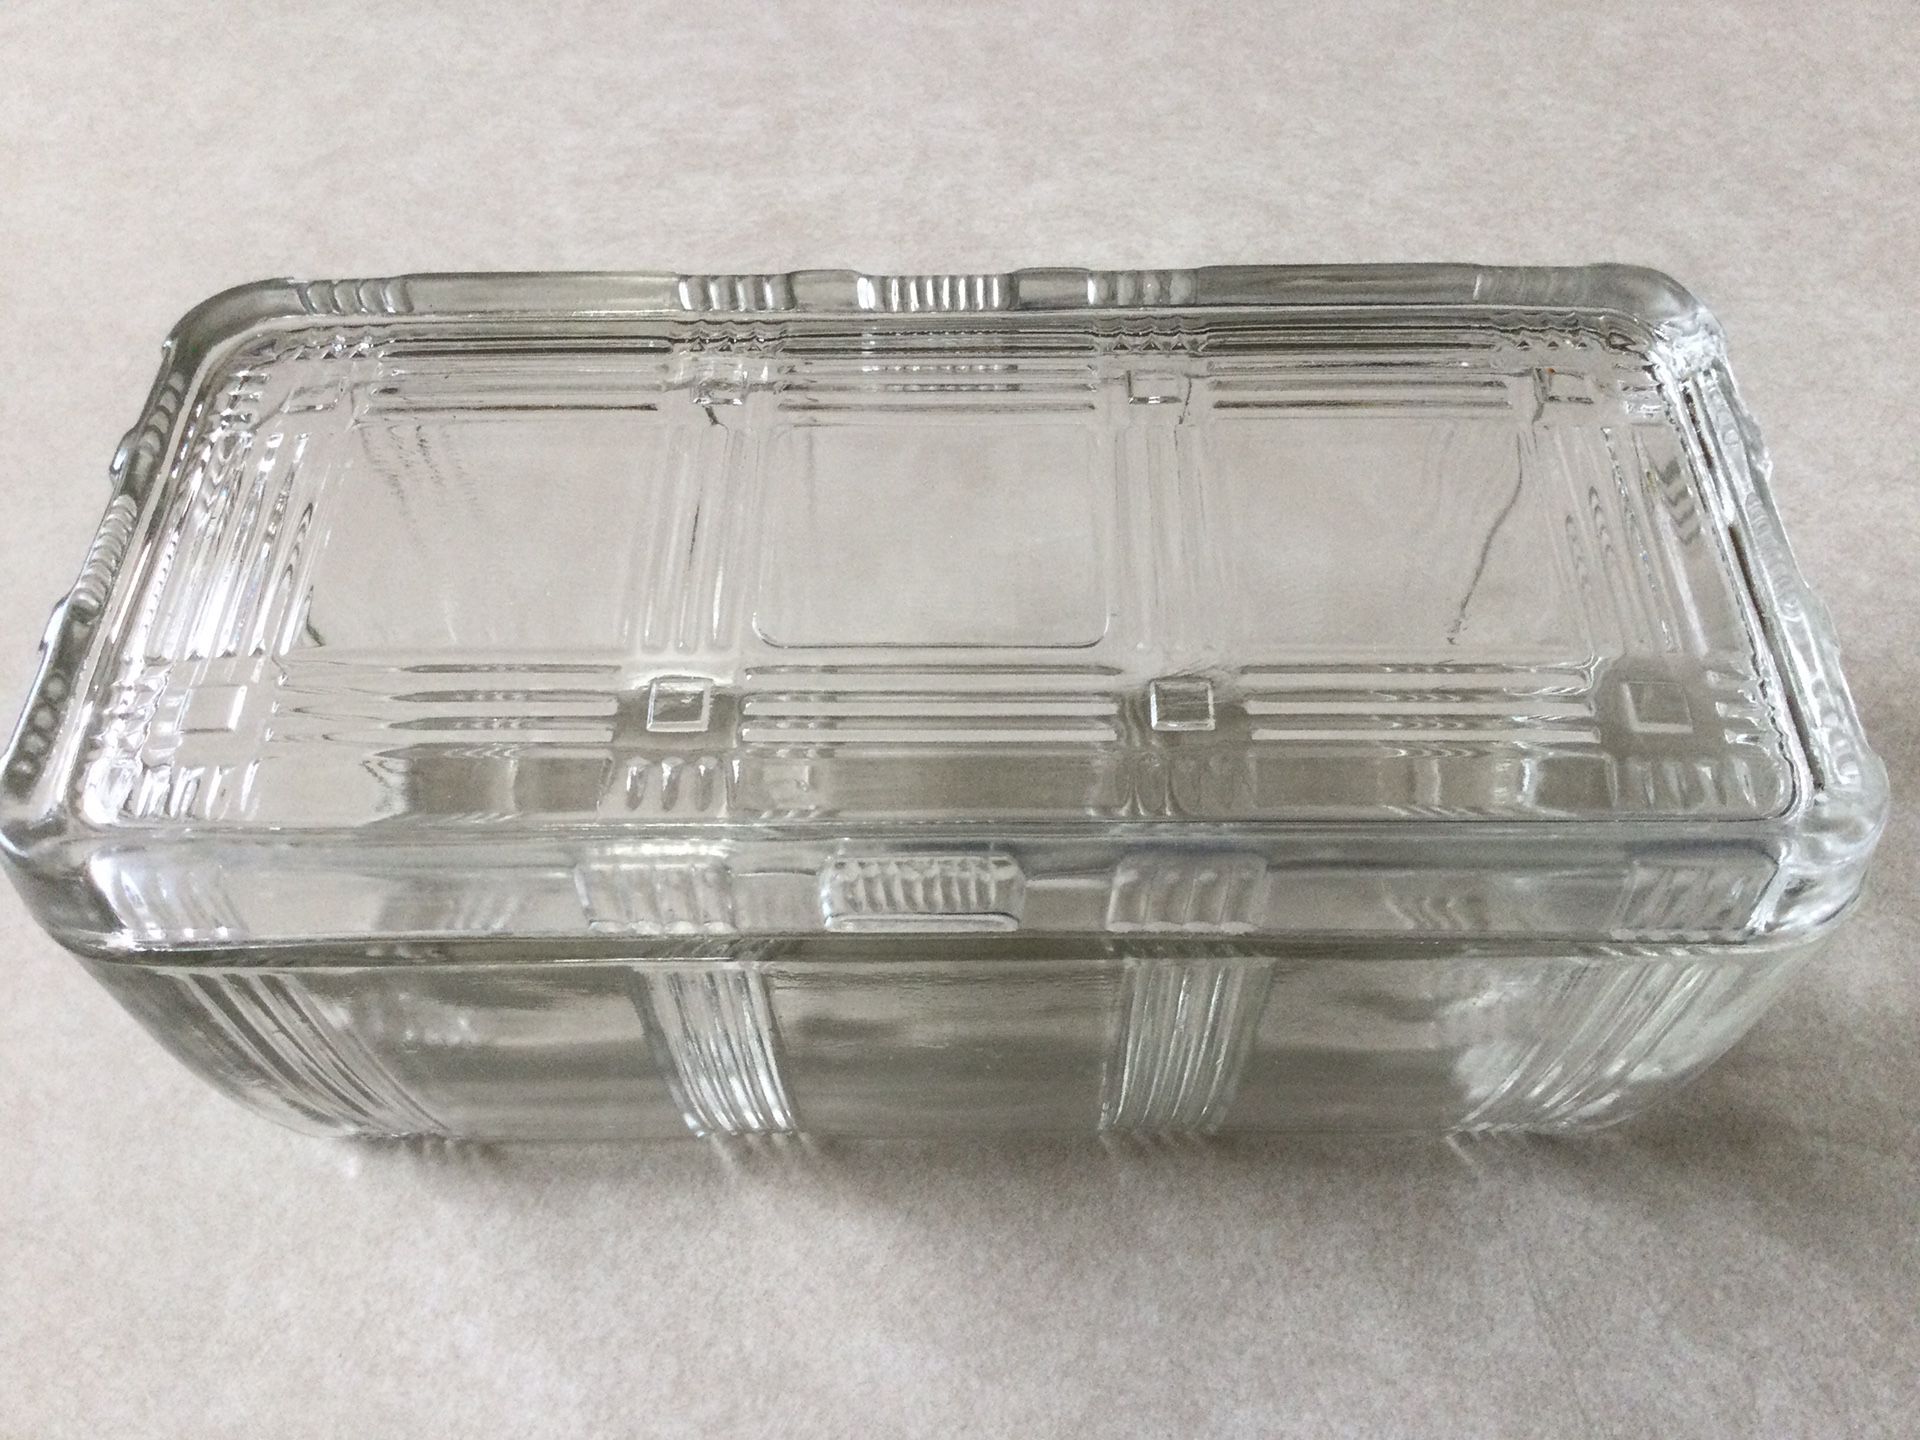 VINTAGE 50’S  CRISS CROSS GLASS REFRIGERATOR STORAGE CONTAINER WITH LID